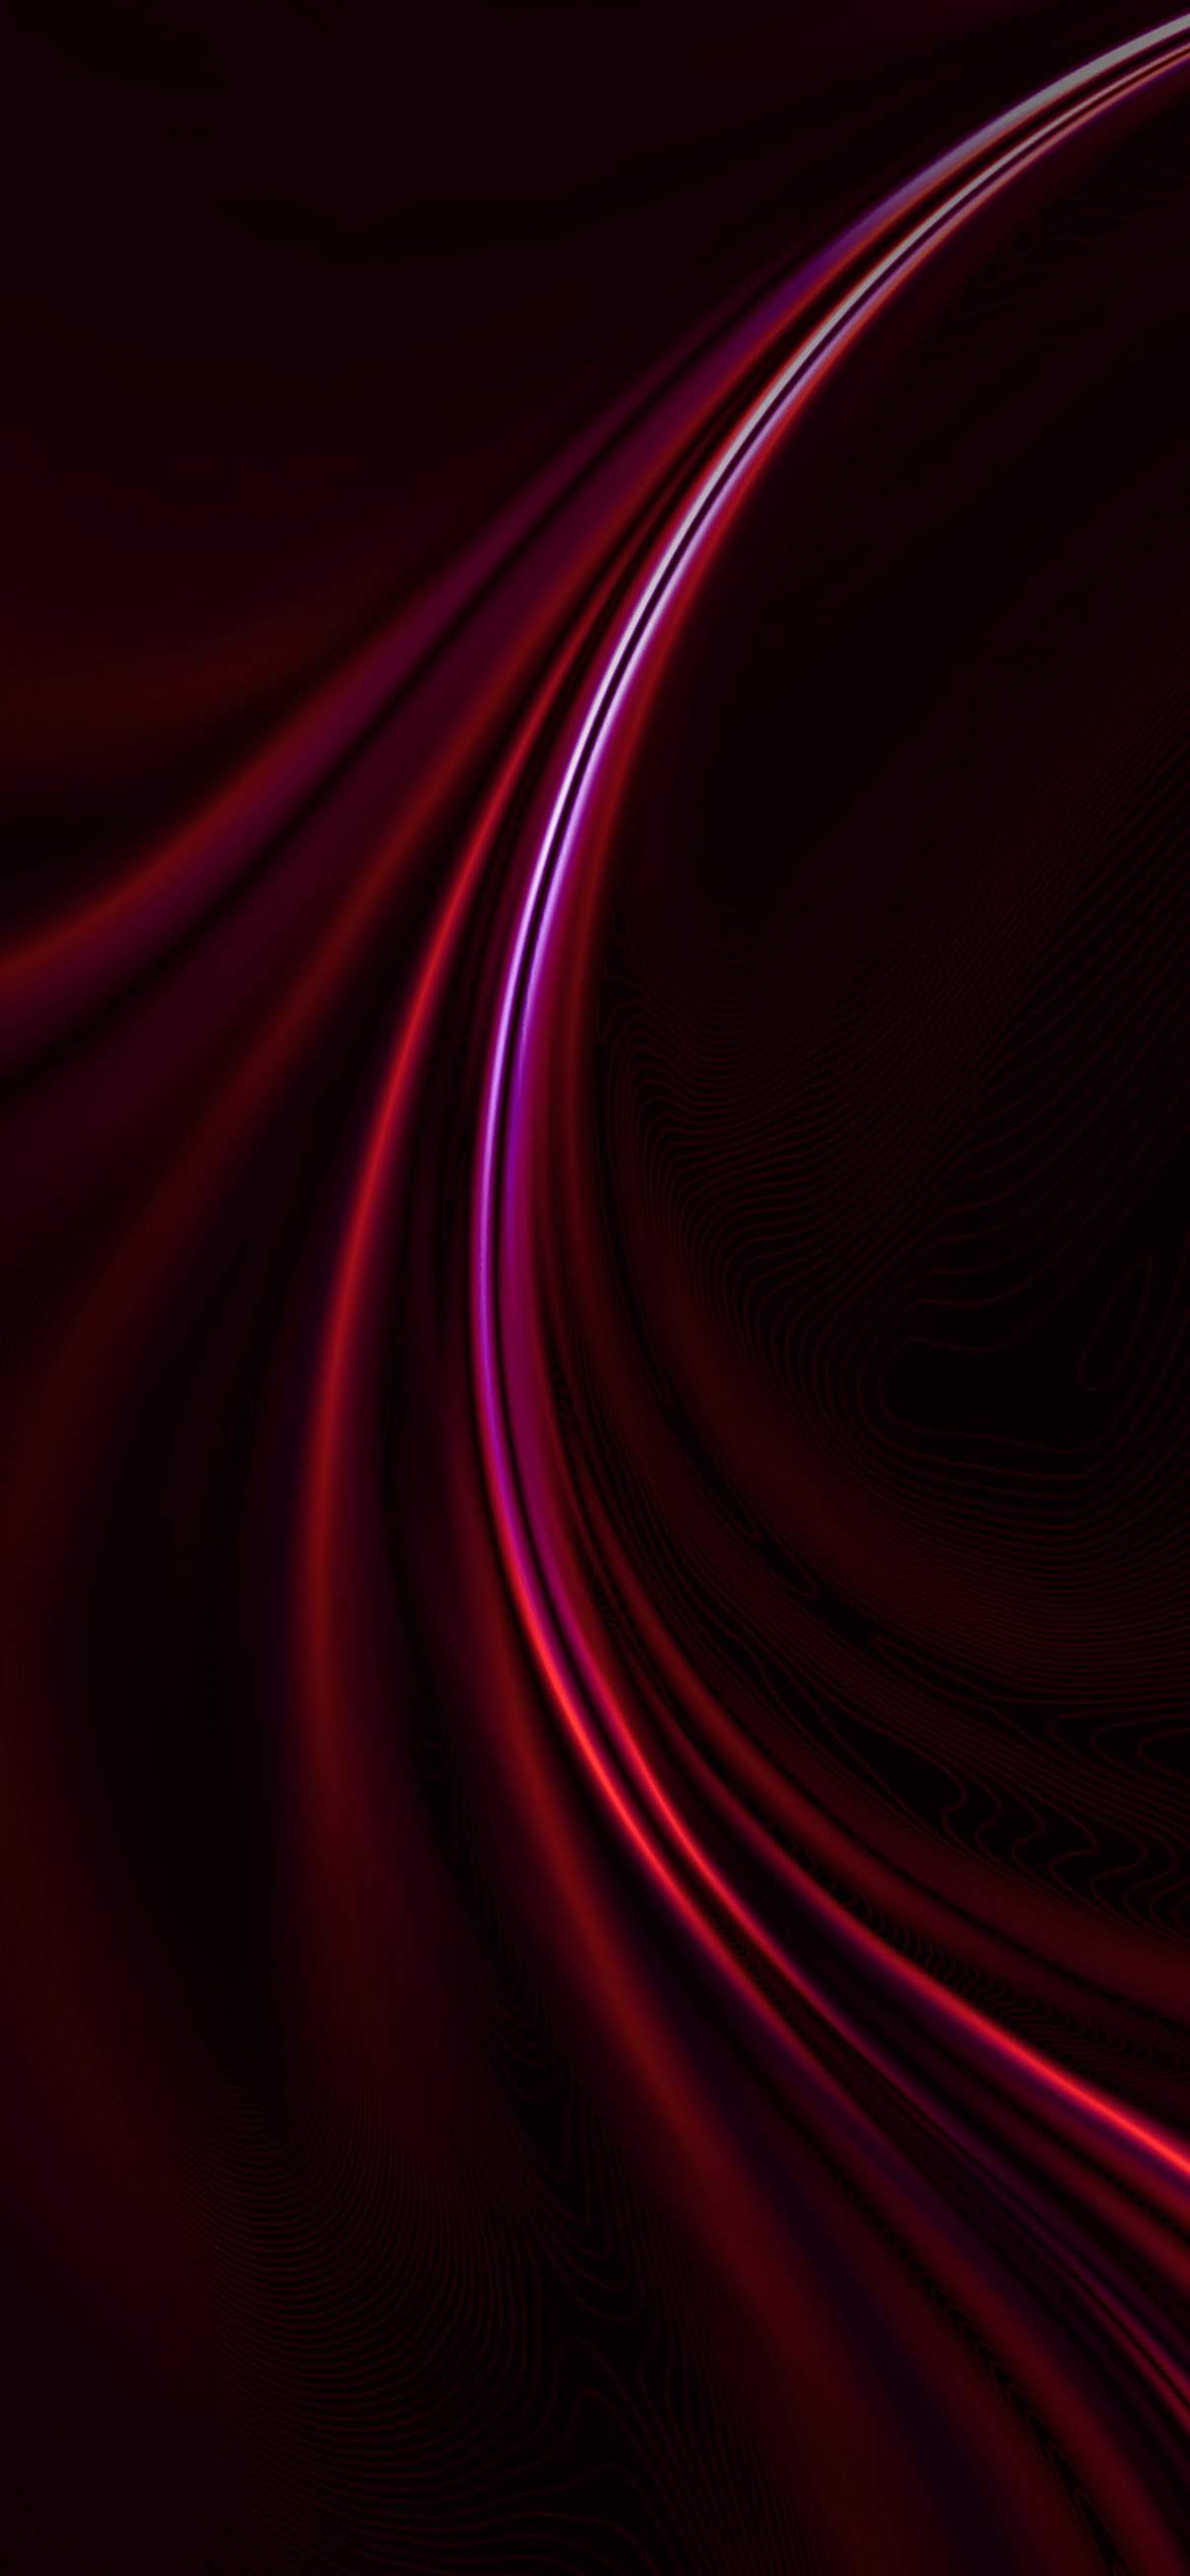 Wallpapers iPhone 11 Pro Max - Pack 2 - WallsPhone